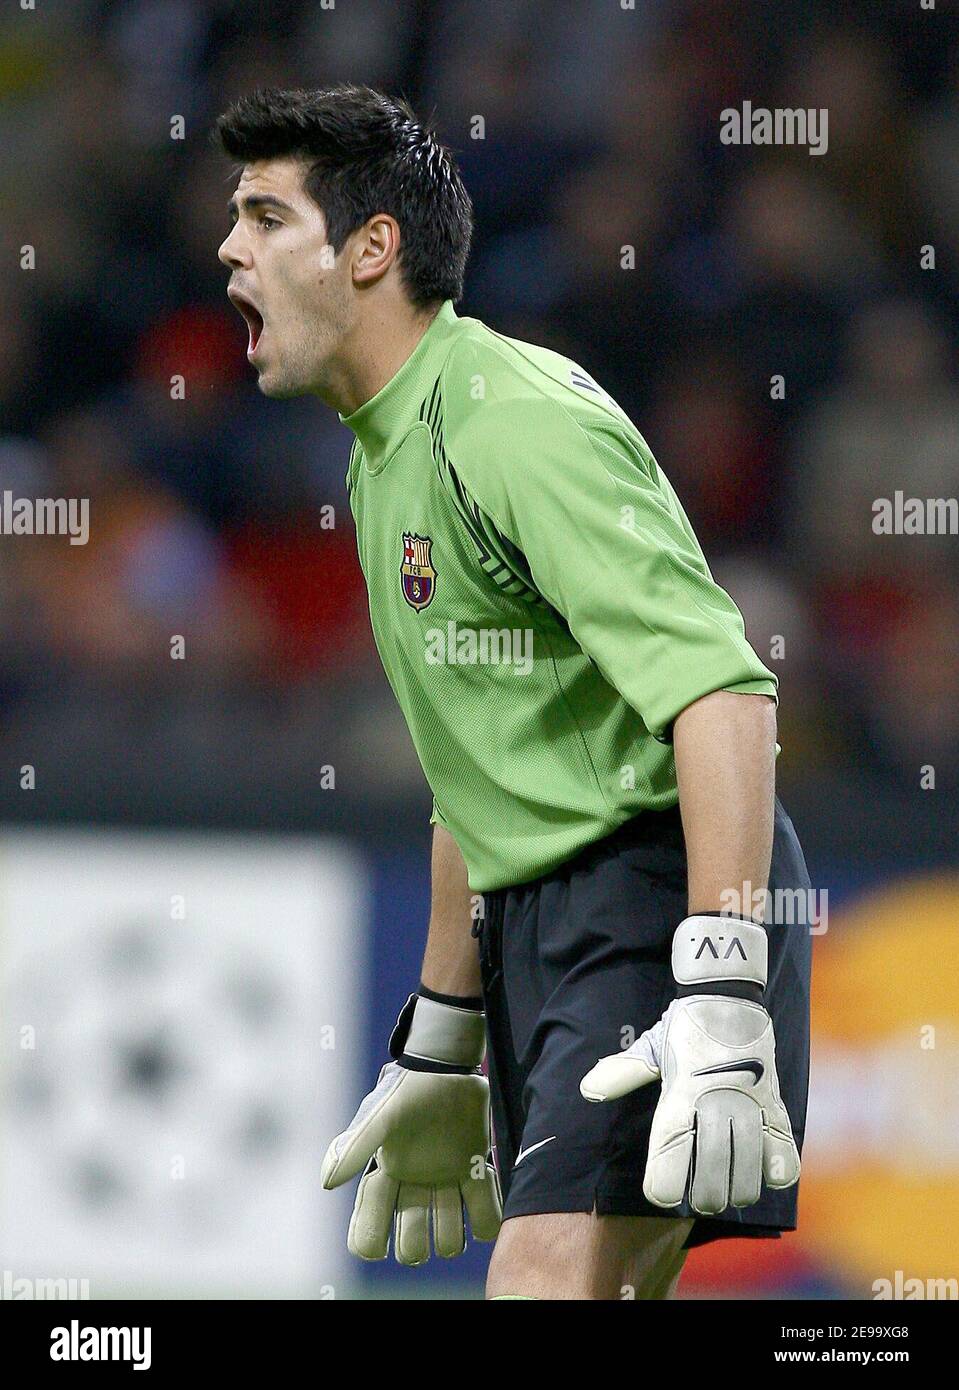 Barcelona's goalkeeper Victor Valdes during the UEFA Champions League Semi-Final First Leg, AC Milan vs Barcelona in Milan, Italy, on April 18, 2006. Barcelona won 1-0. Photo by Christian Liewig/ABACAPRESS.COM Stock Photo